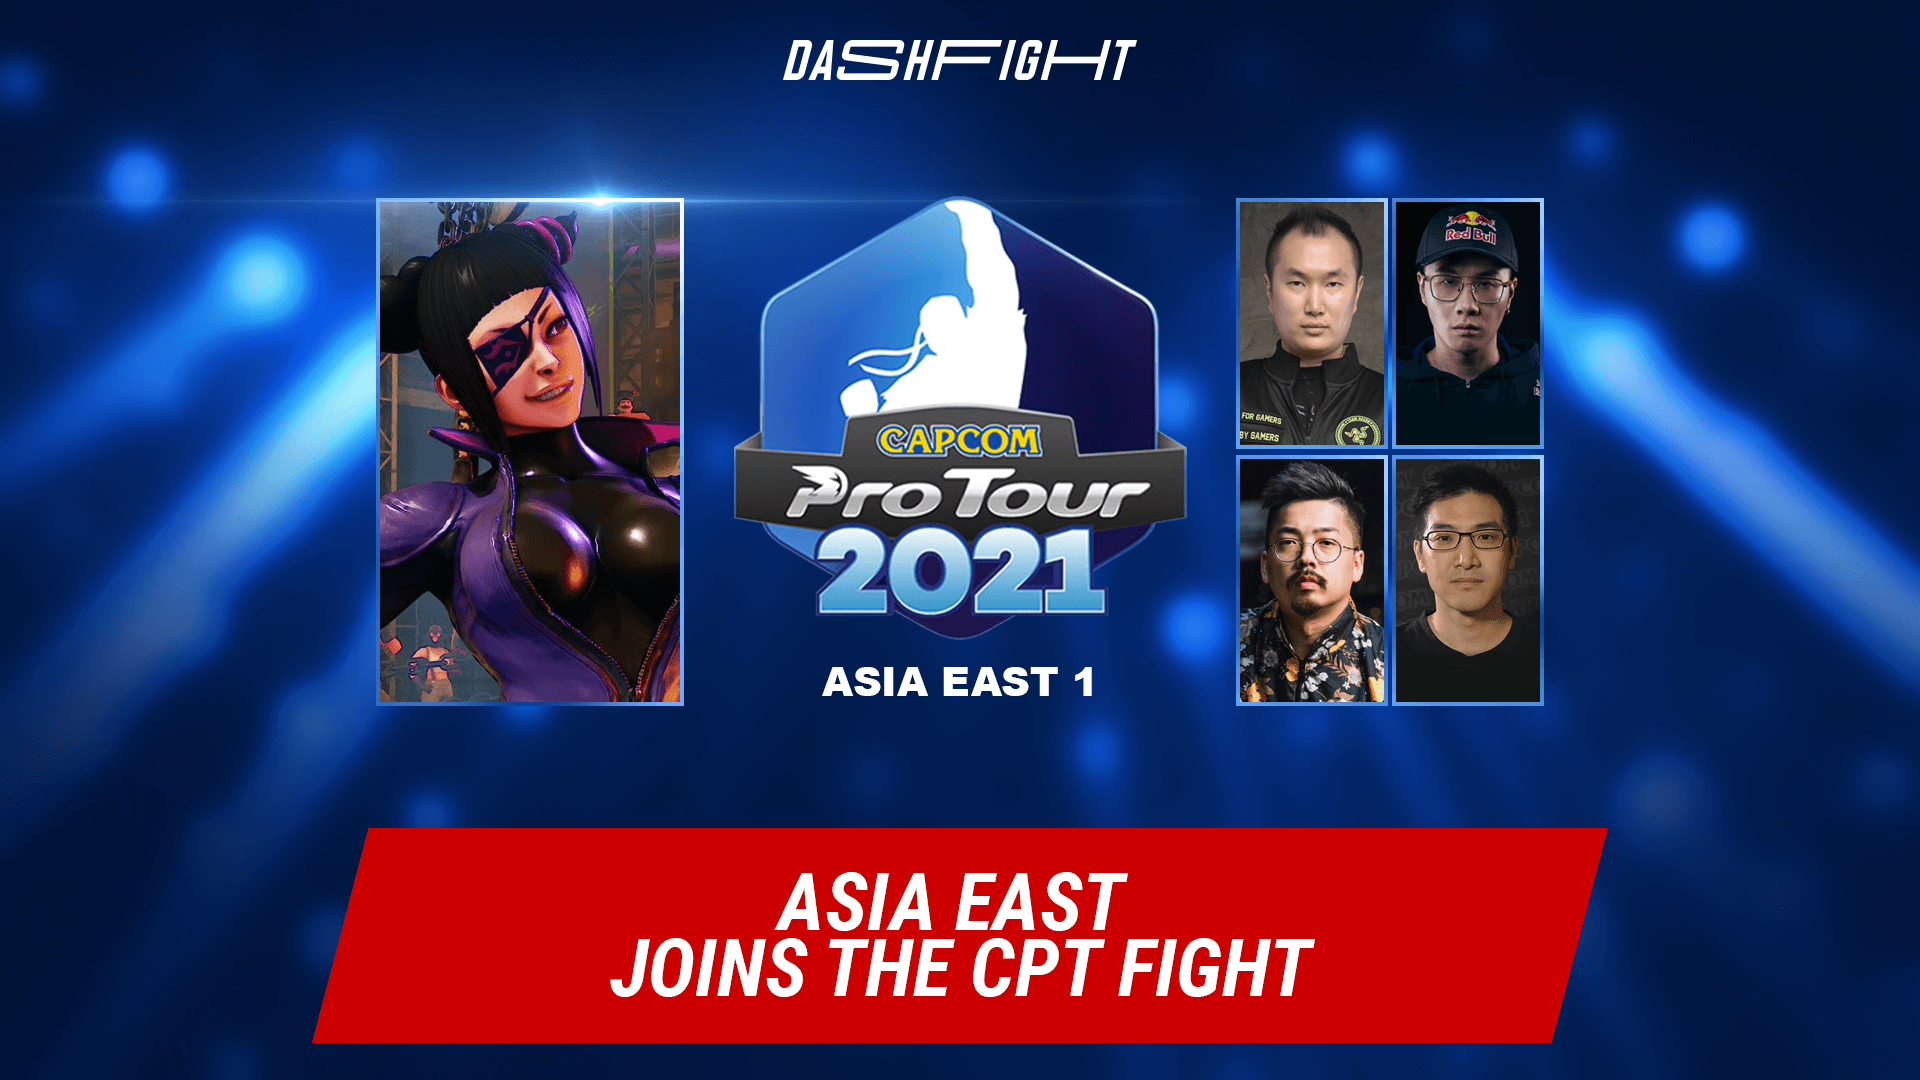 Asia East Joins the CPT Fight